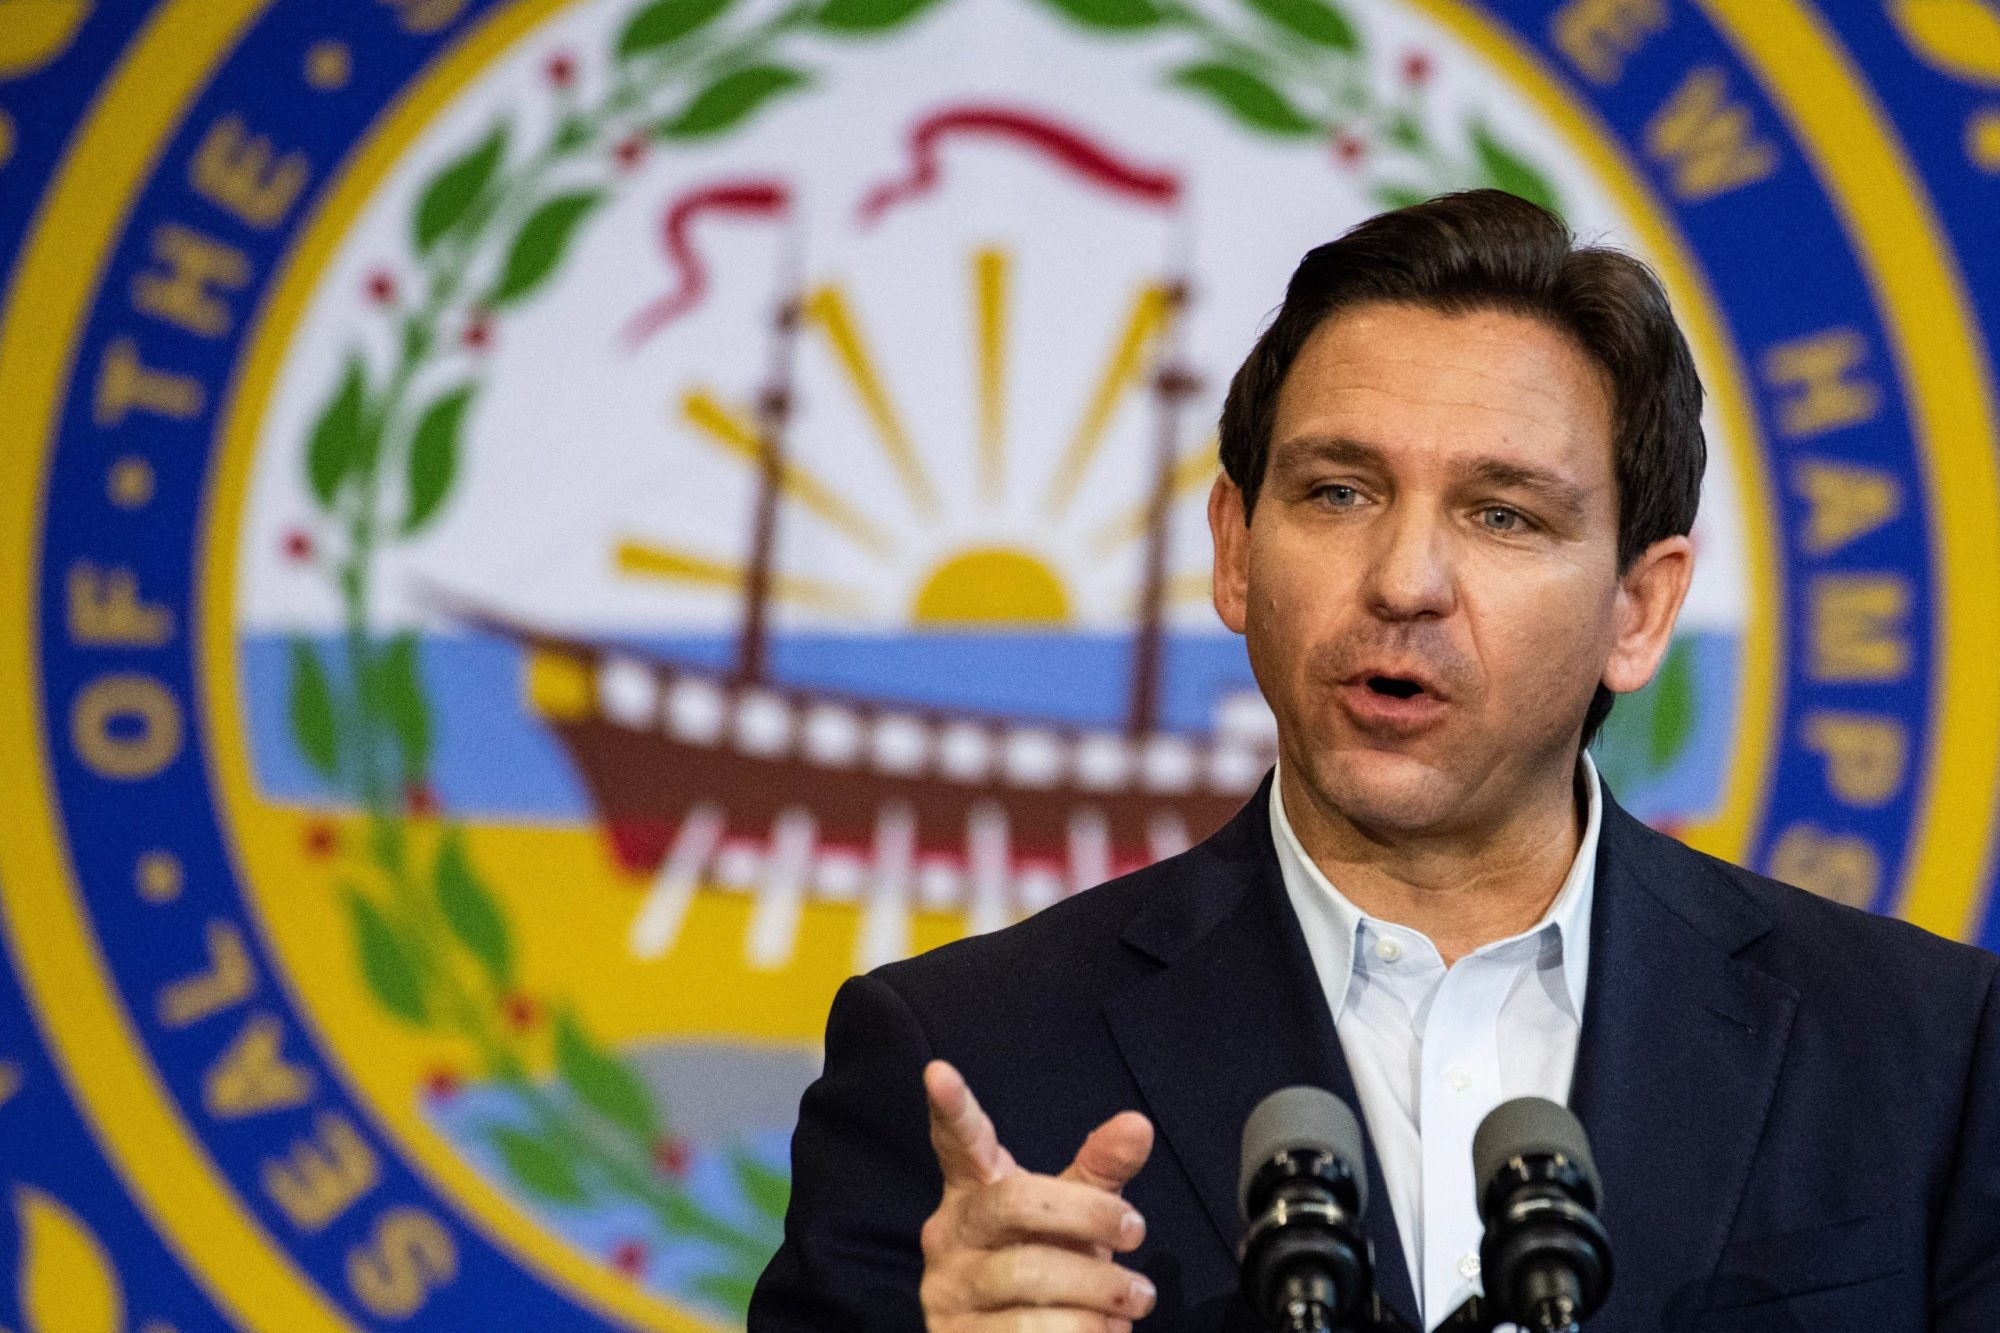 Gov. Ron DeSantis delivers a statement in front of a large Florida State Seal.